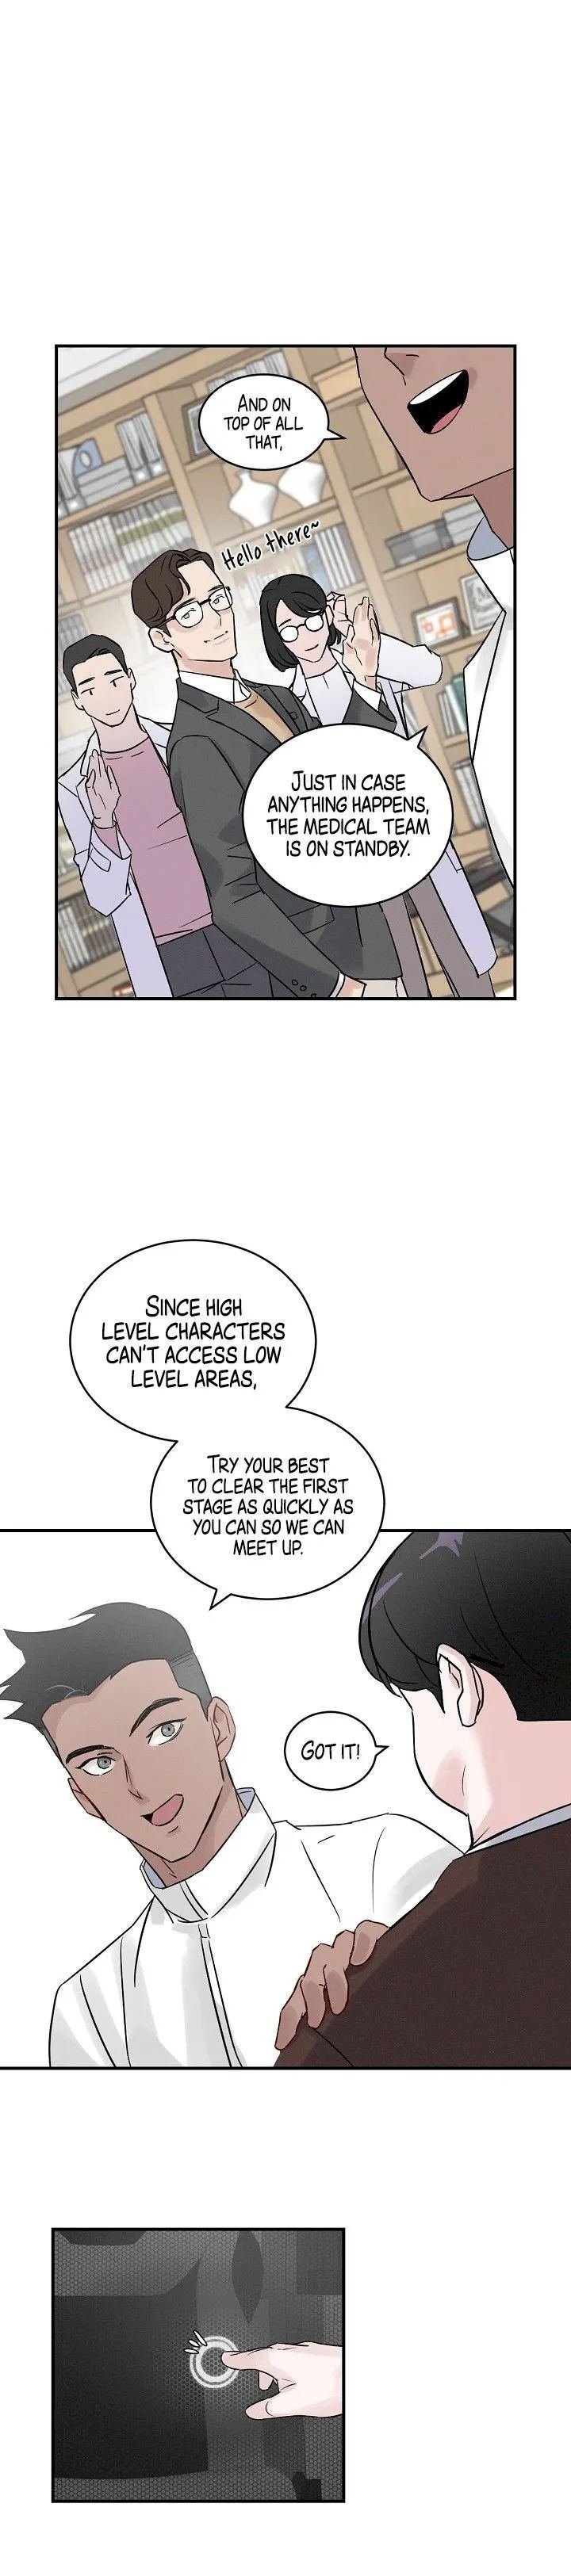 leveling-up-by-only-eating-chap-3-14